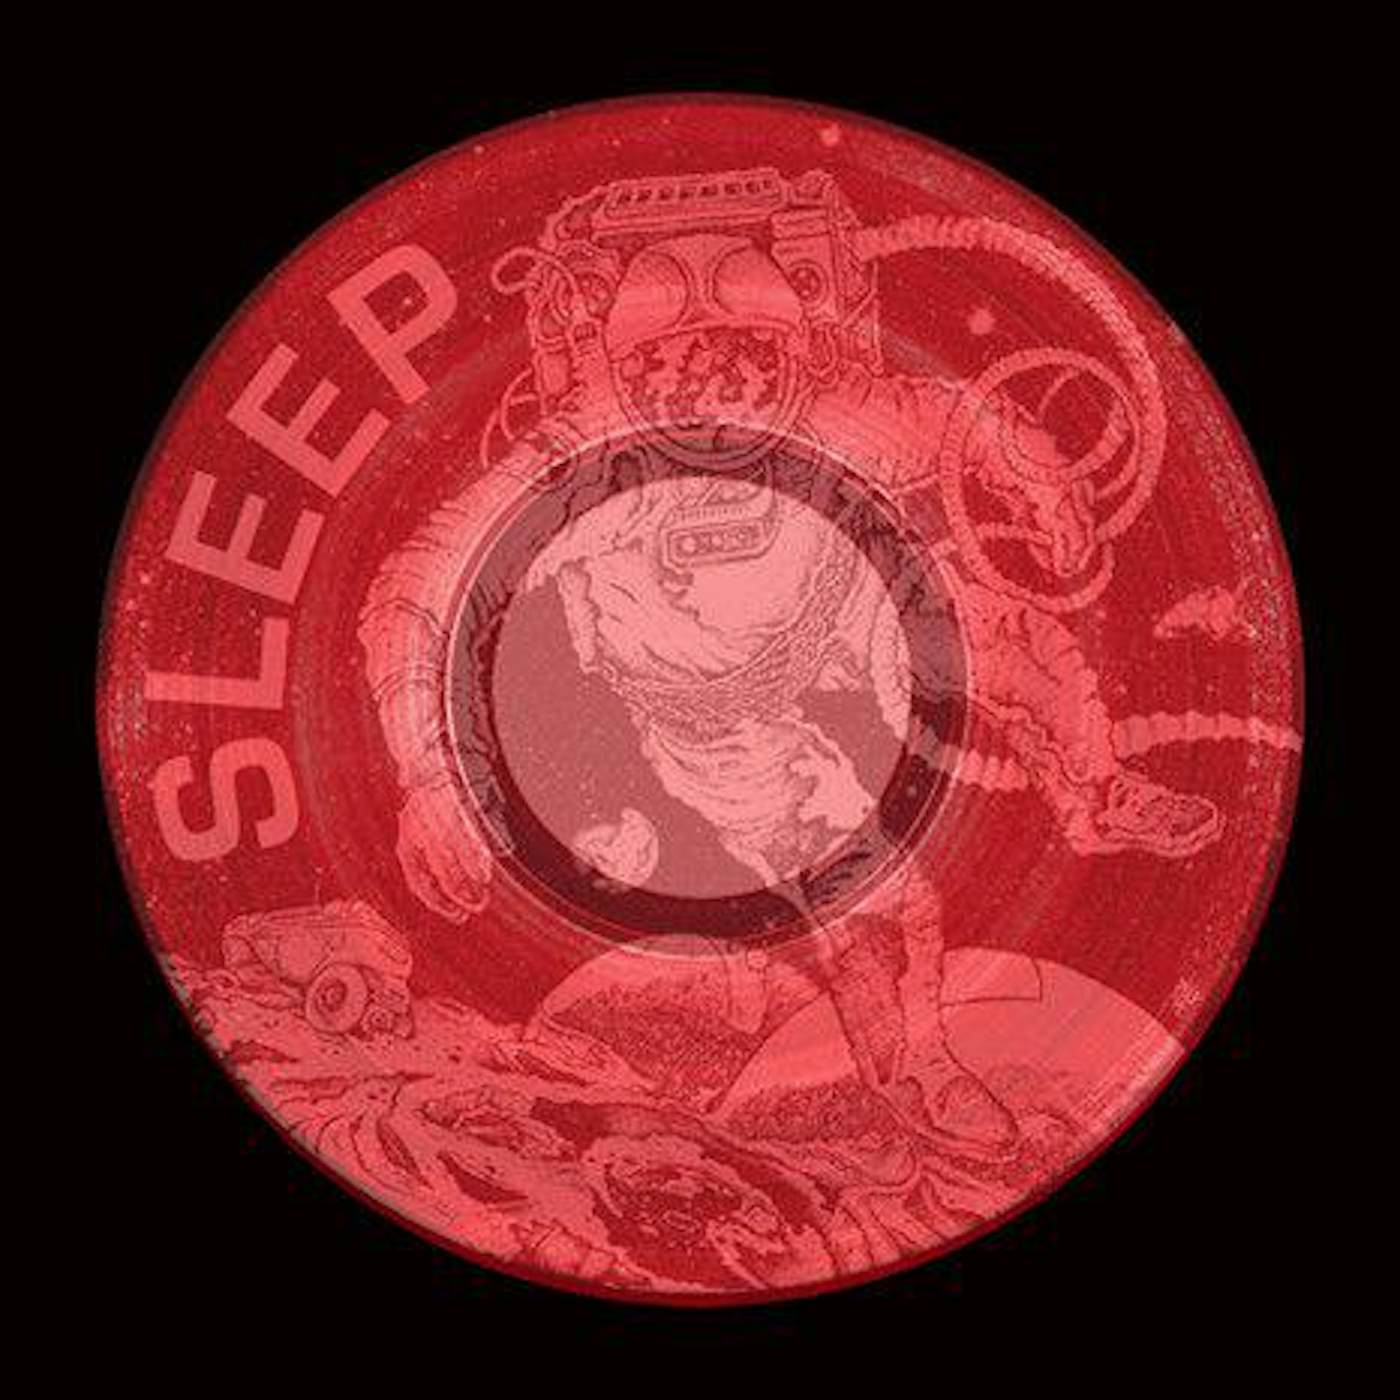 Sleep CLARITY - Limited Edition Red Colored Vinyl Record